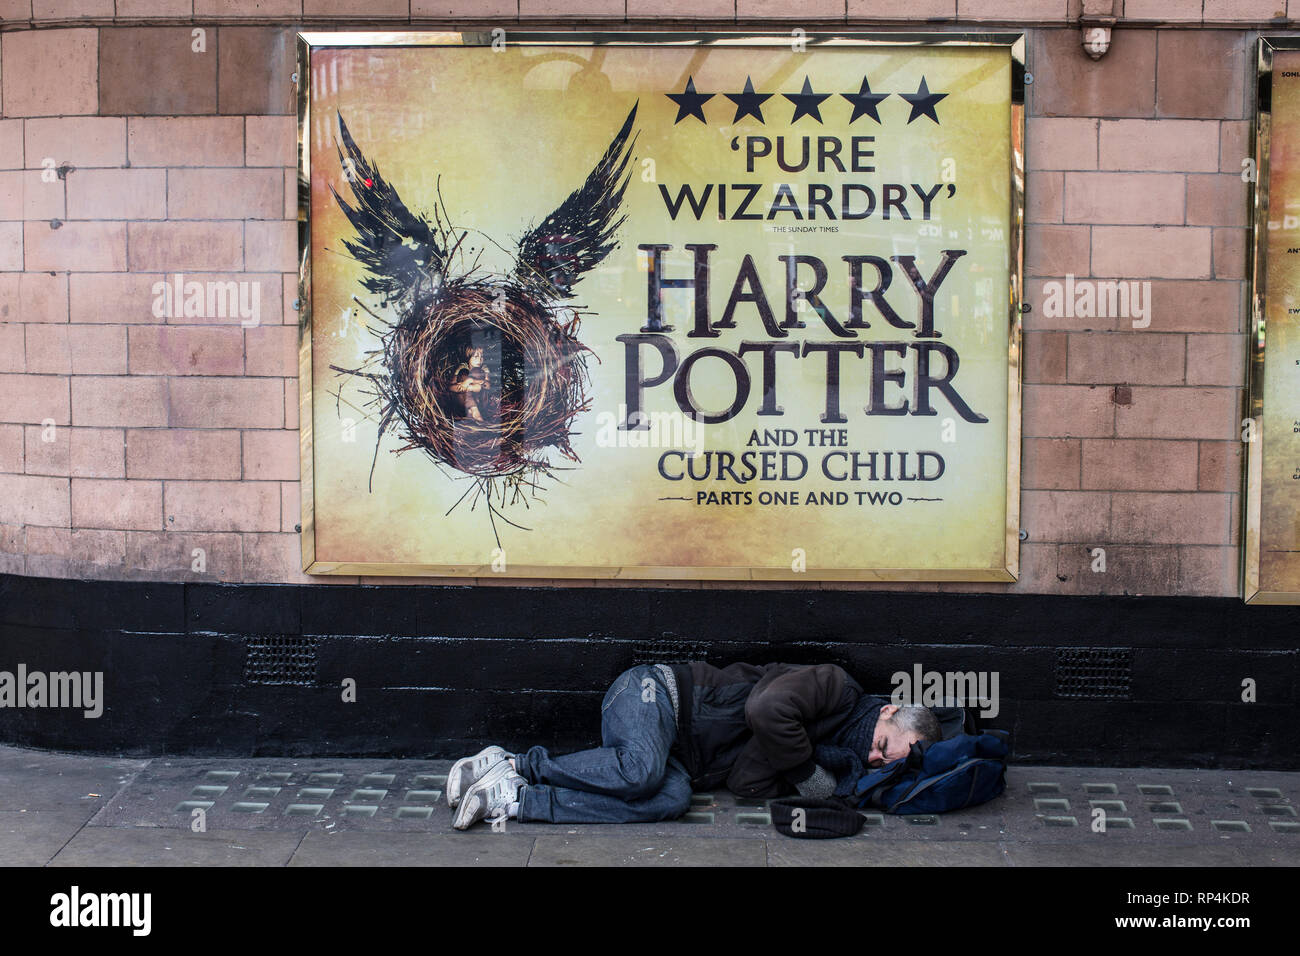 Homeless addict sleeping on the pavement underneath the sign of Harry Potter outside the Palace theatre on Cambridge Circus, London, UK Stock Photo